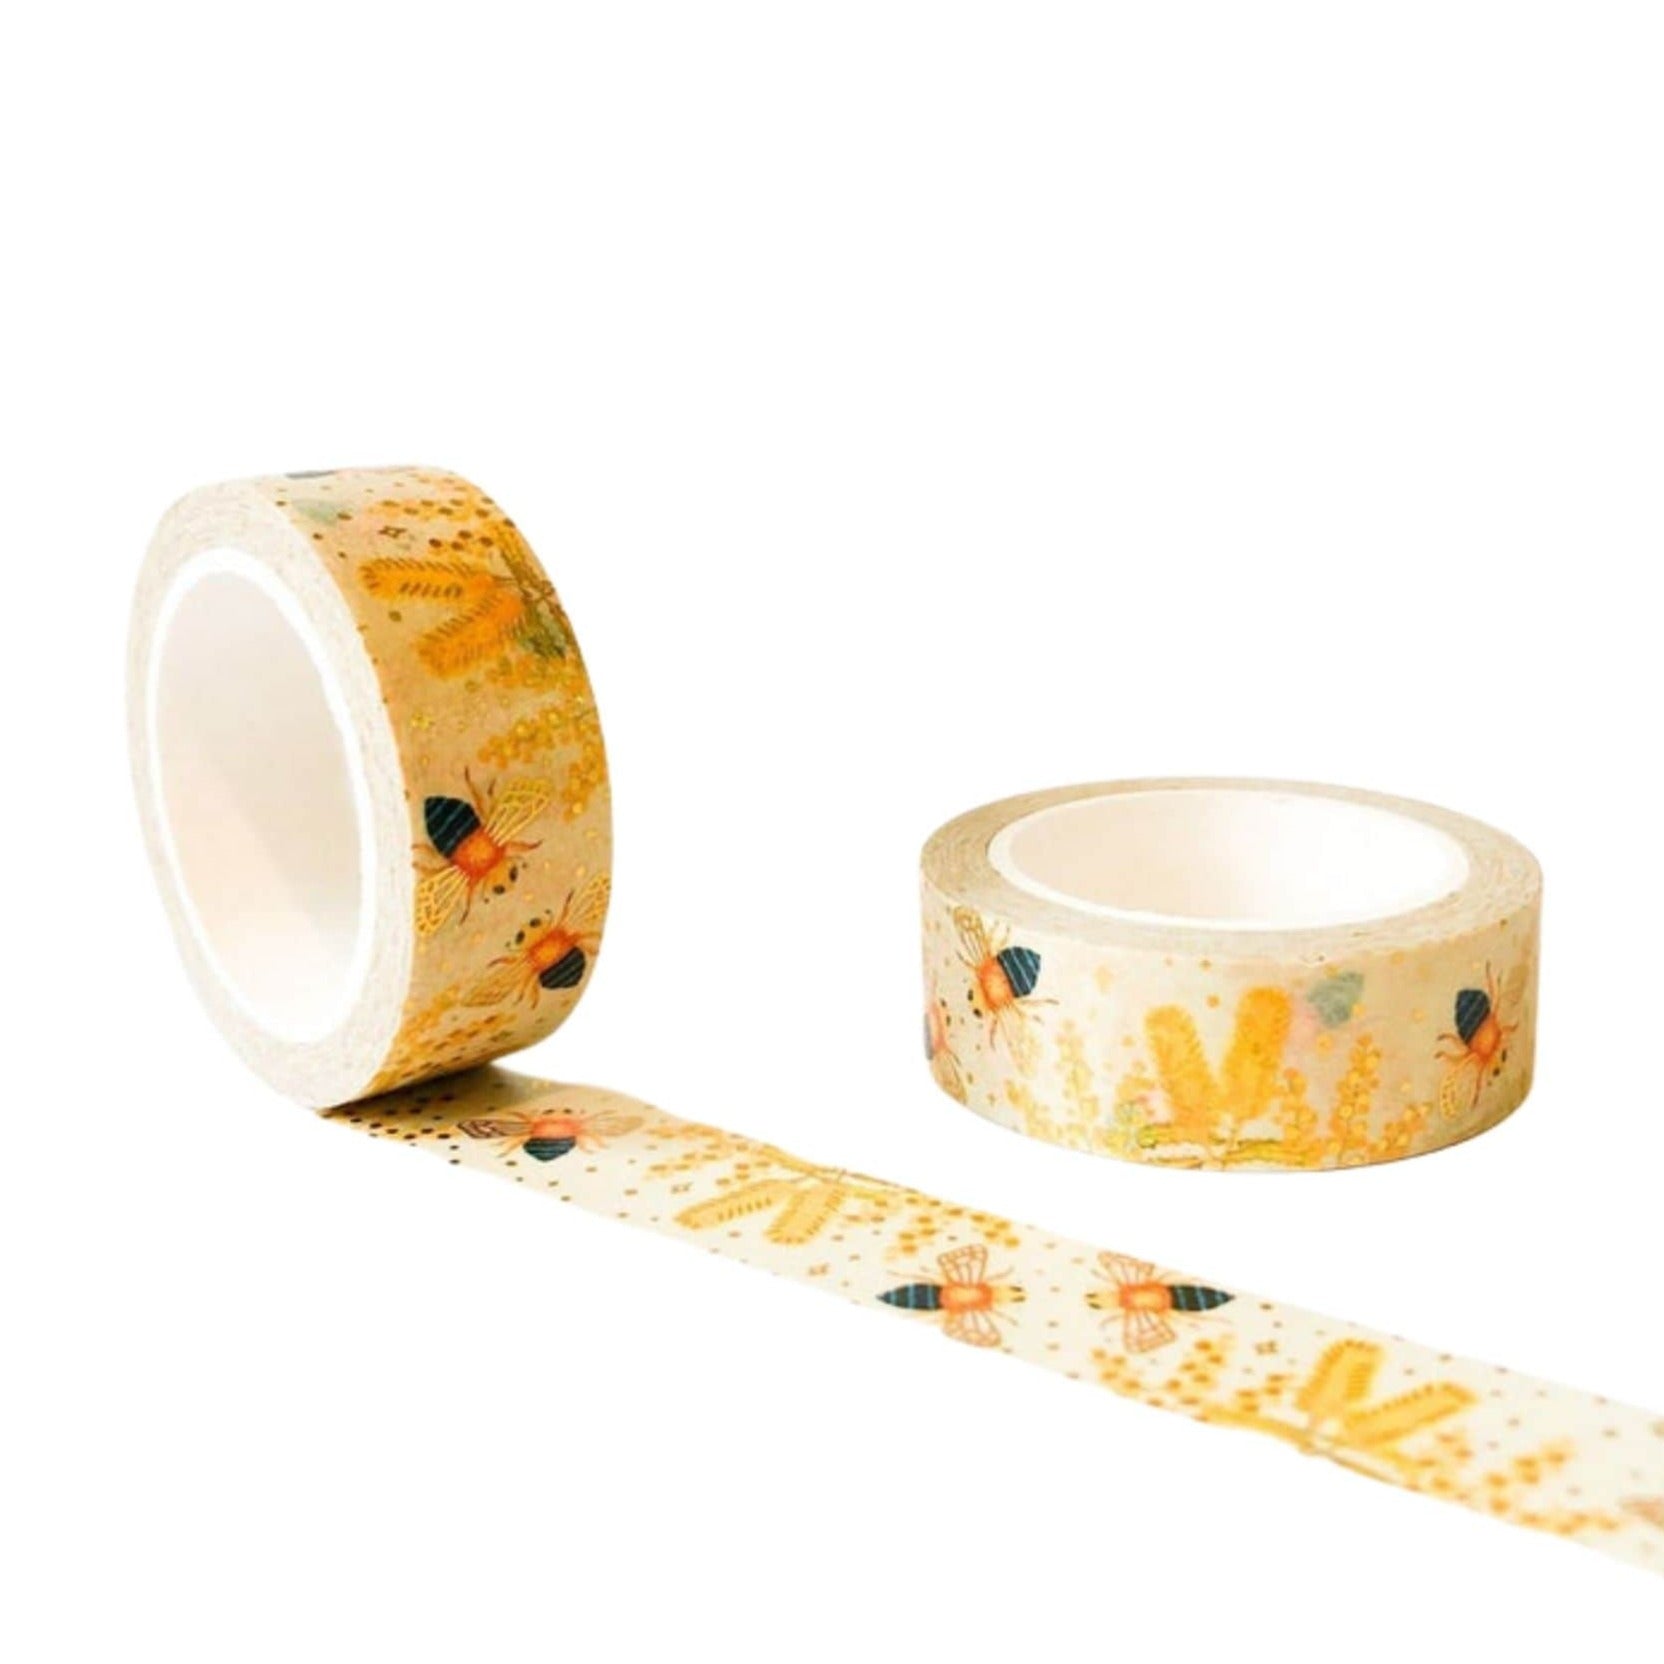 Mister Moose Shop - Australiana Collection - Blue Banded Bees washi tape with Australian flowers - Paper Kooka